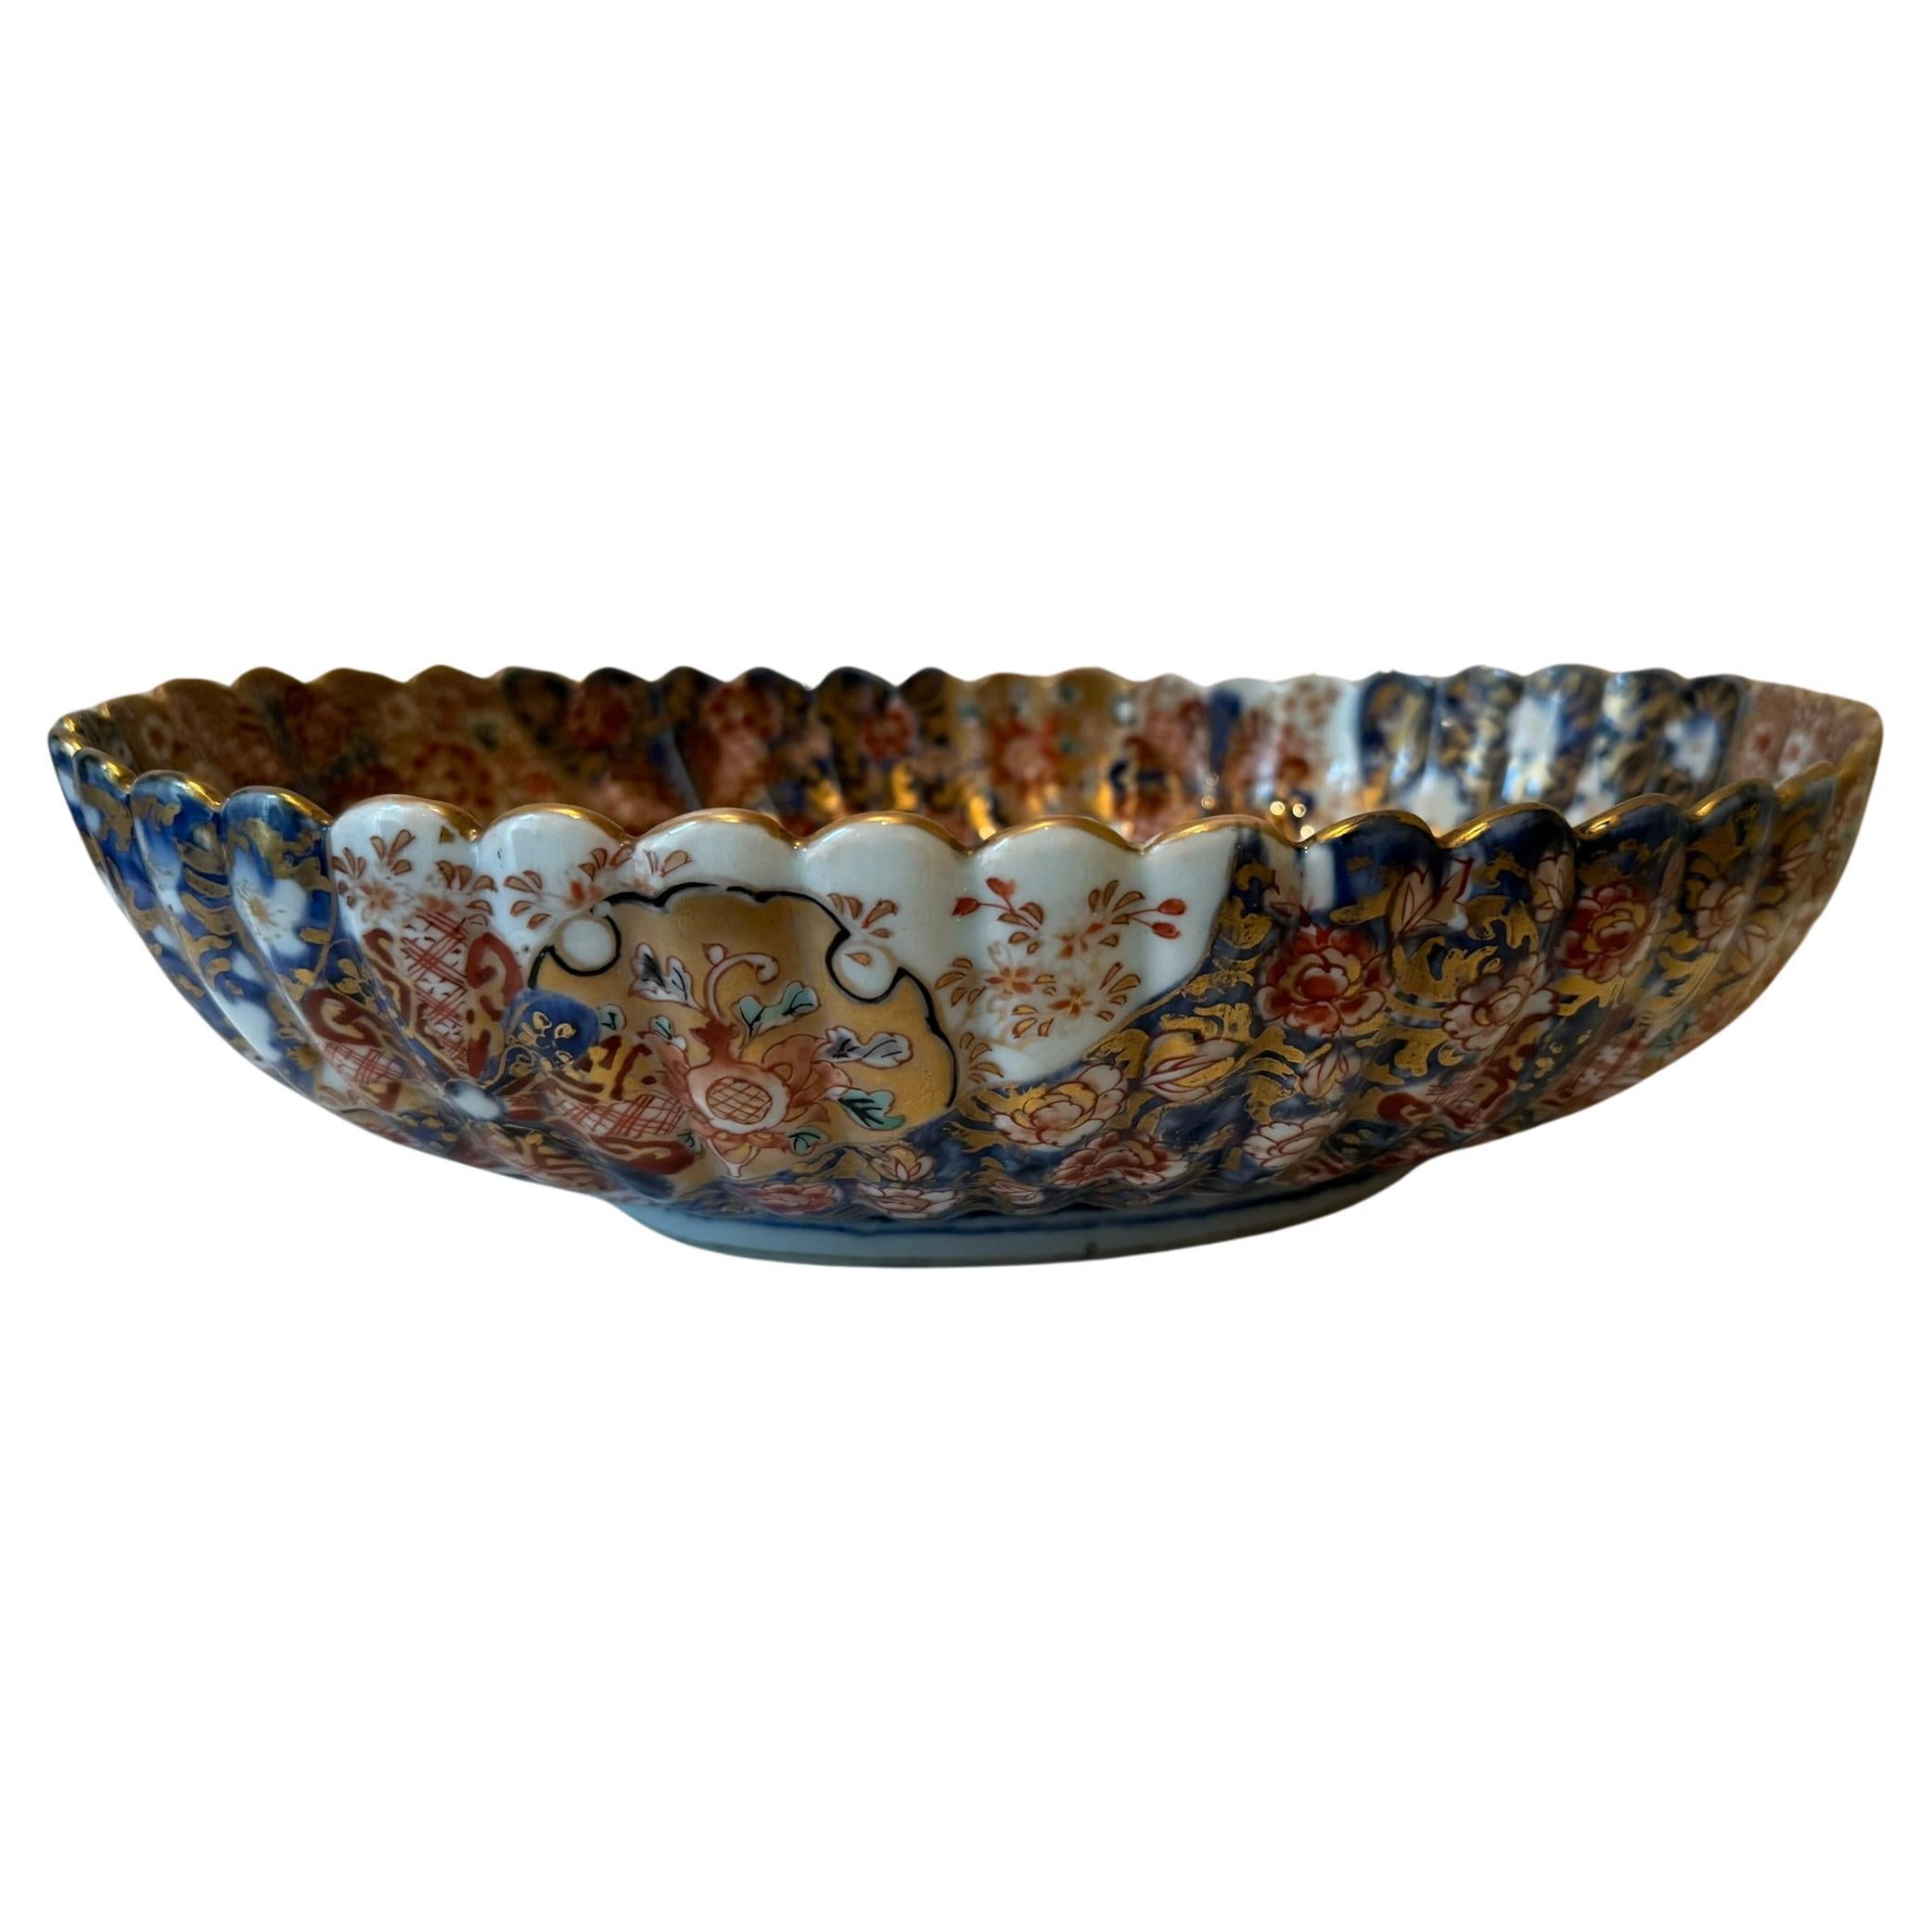 Japanese Early Meiji Period Porcelain Bowl, circa 1870 For Sale 2